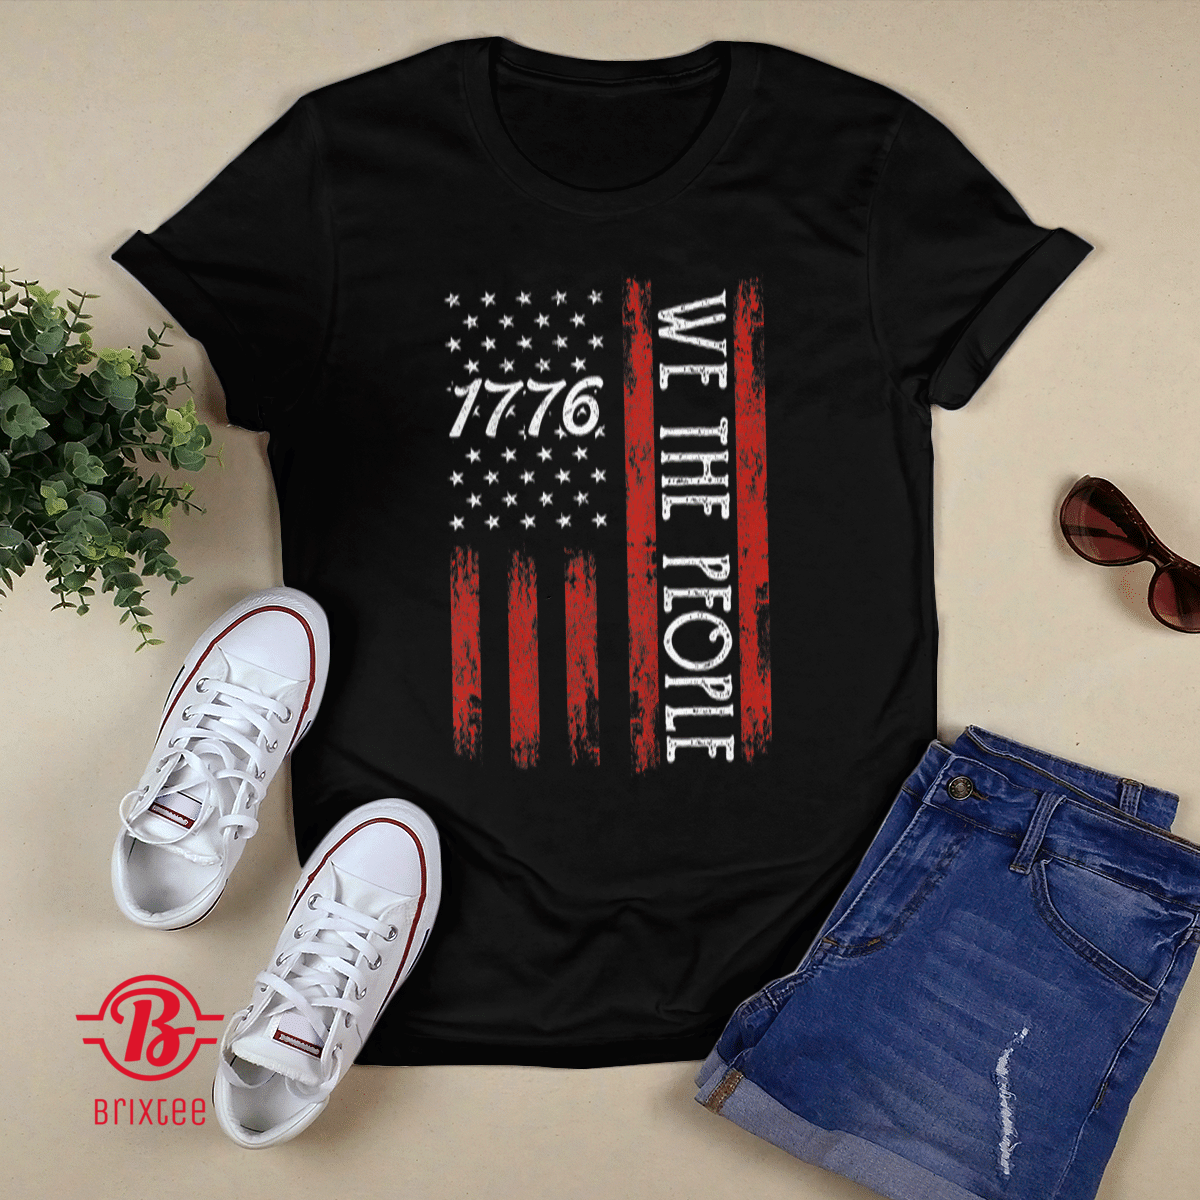 4th Of July 1776 Shirts For Men, We The People American Flag